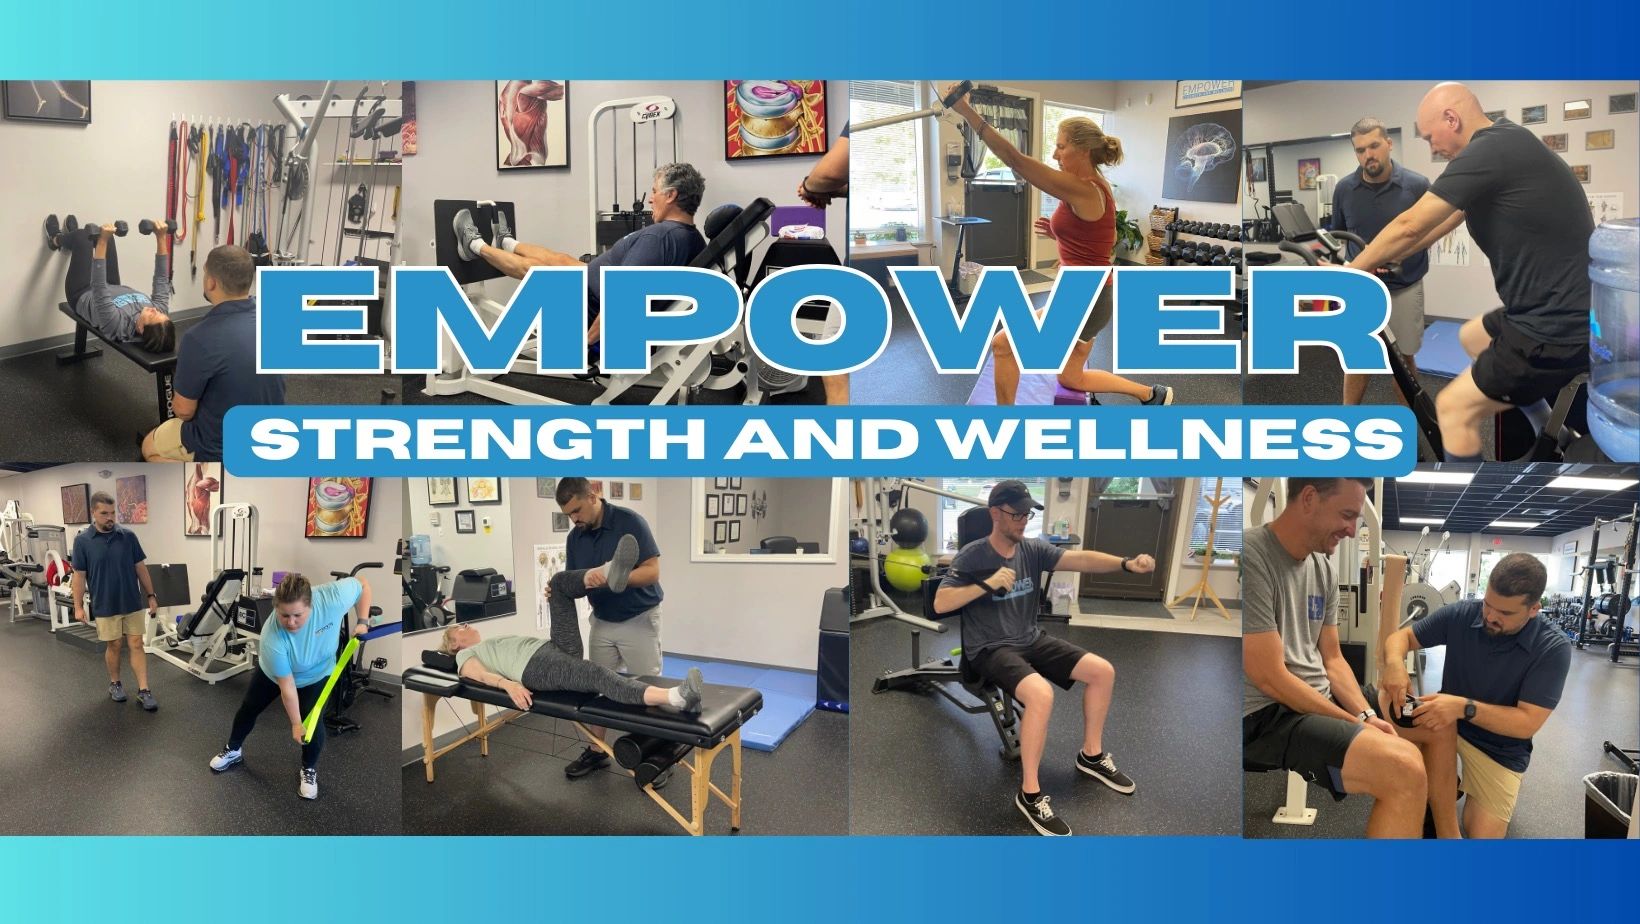 Personal Training Shelton CT - Empower Strength and Wellness